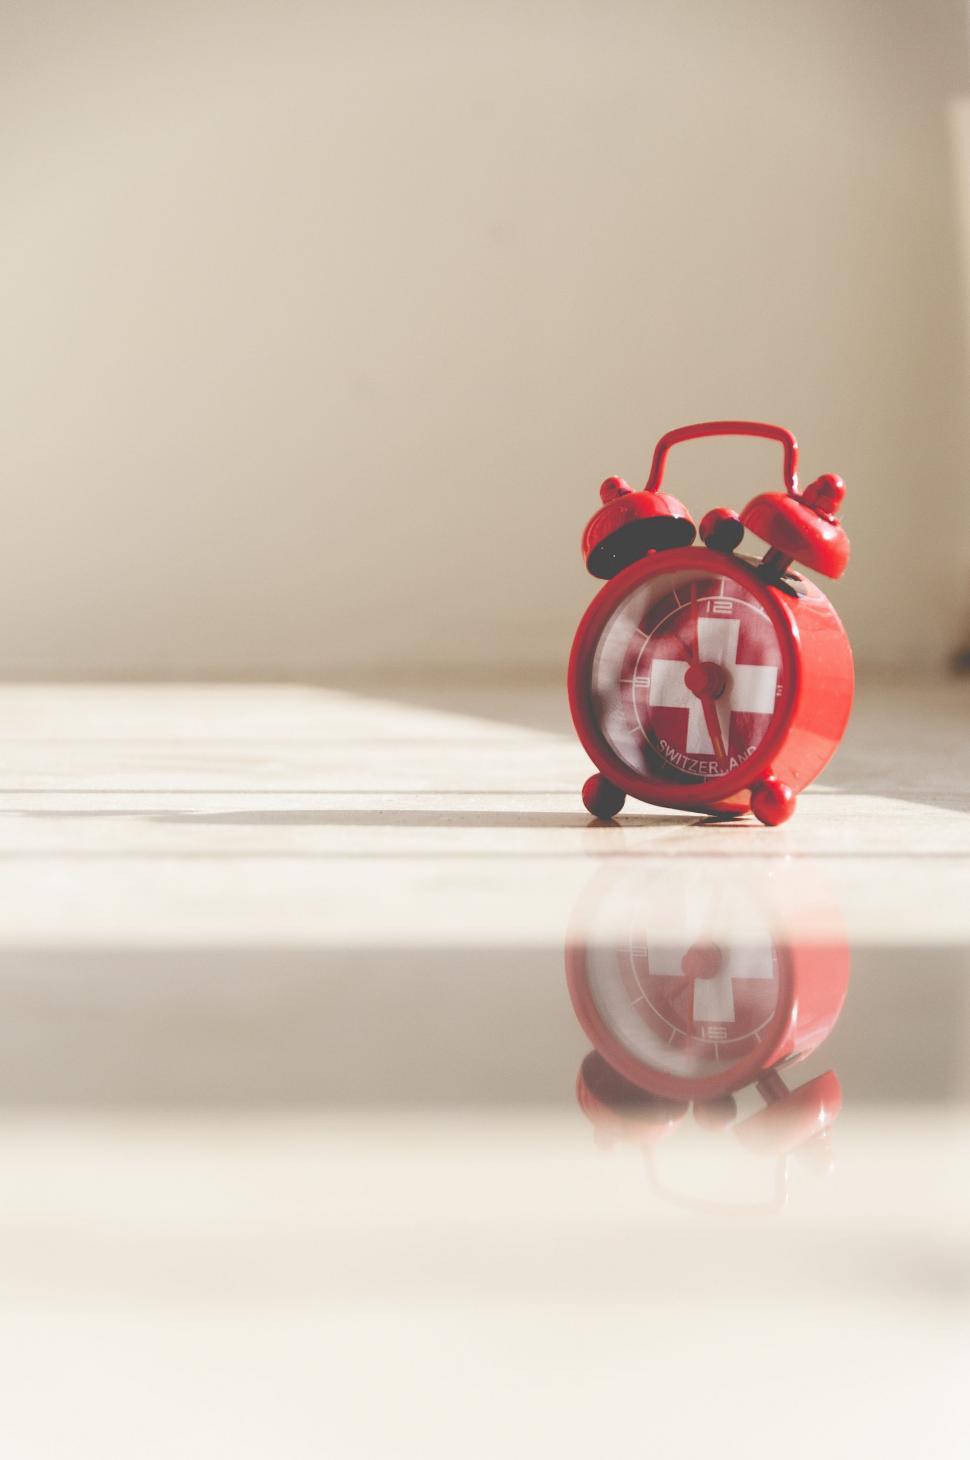 Free Image of Red Alarm Clock on White Counter 